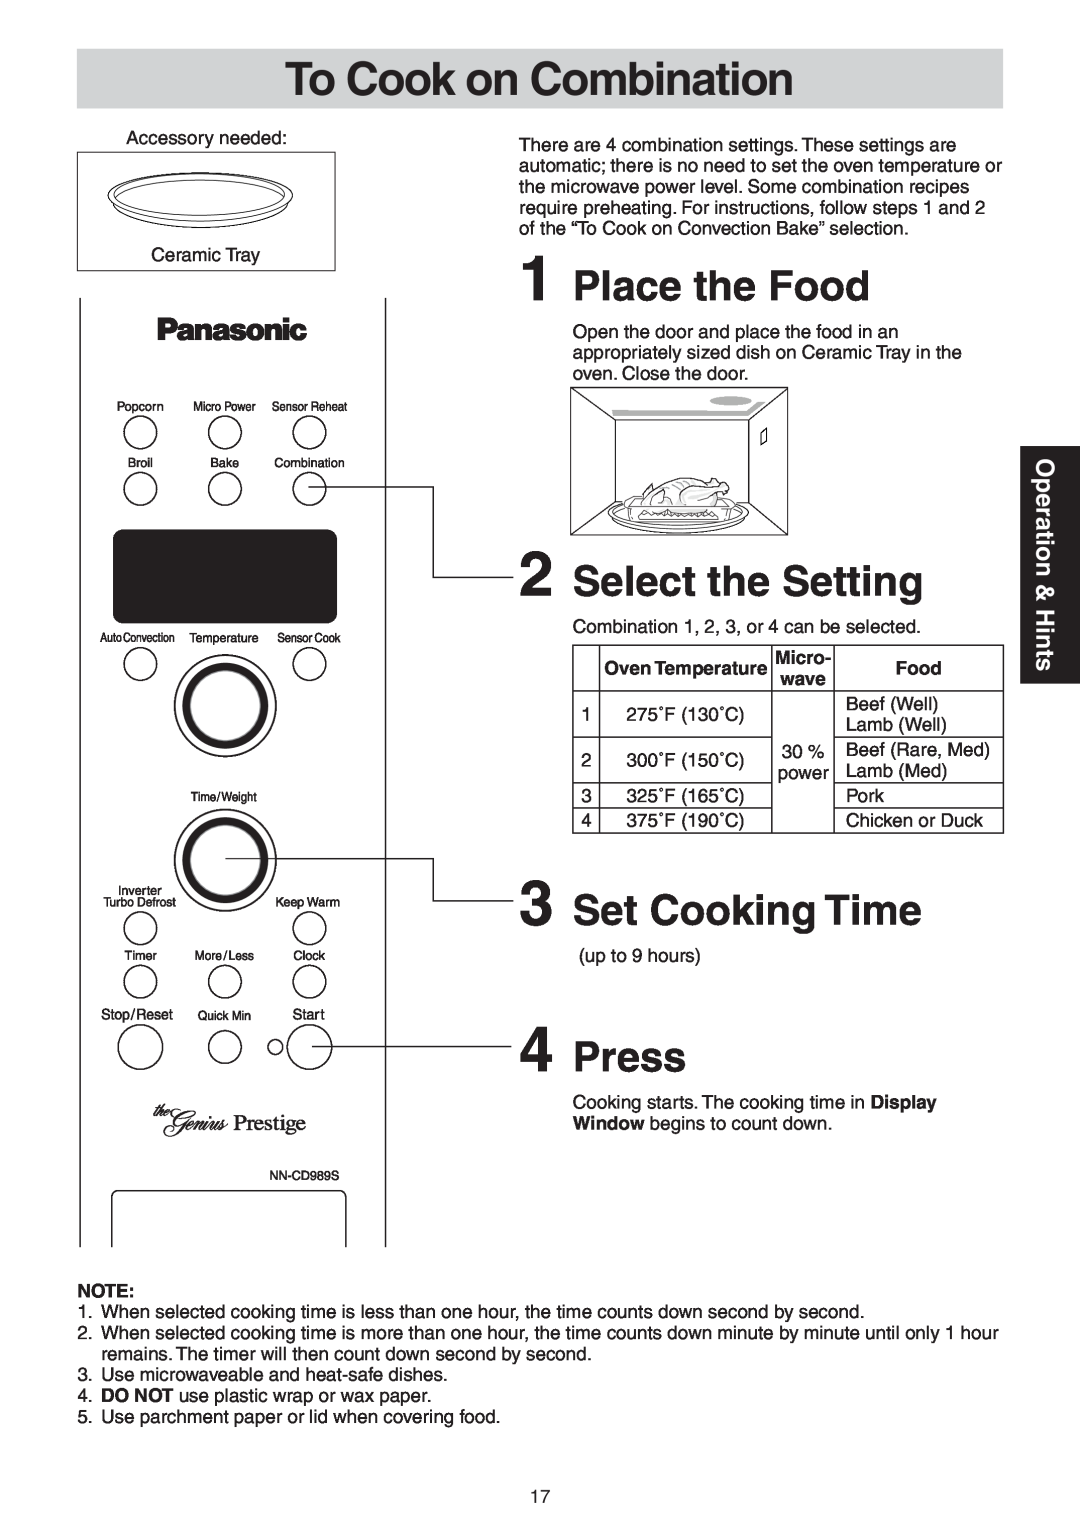 Panasonic NN-CD989S manual To Cook on Combination, 1Place the Food, 2Select the Setting, Set Cooking Time, 4Press 